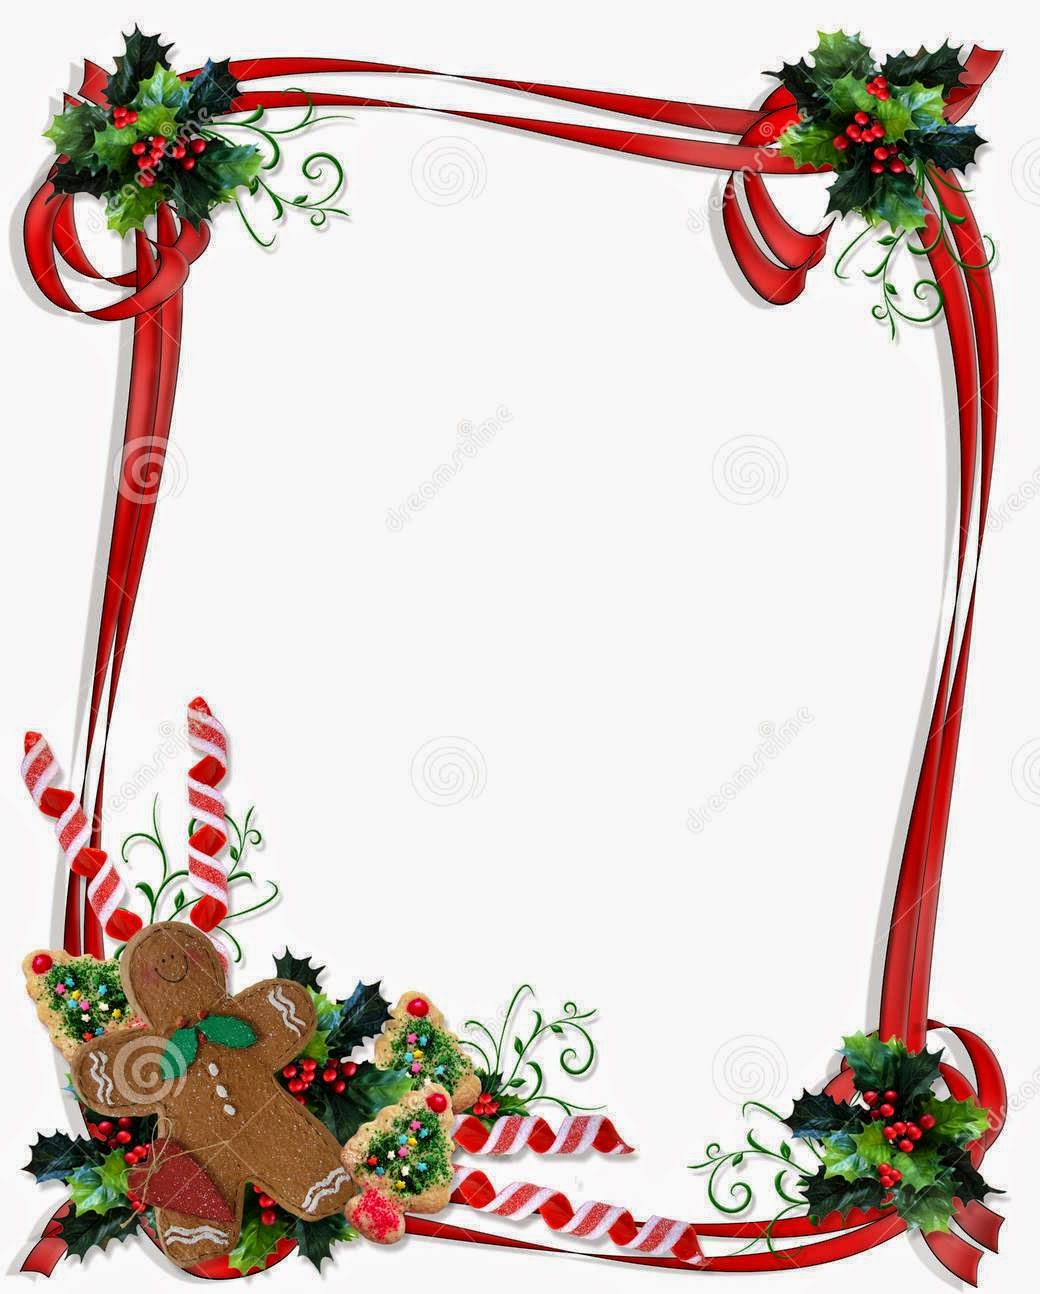 clipart borders free download 2014 christmas day free border ...